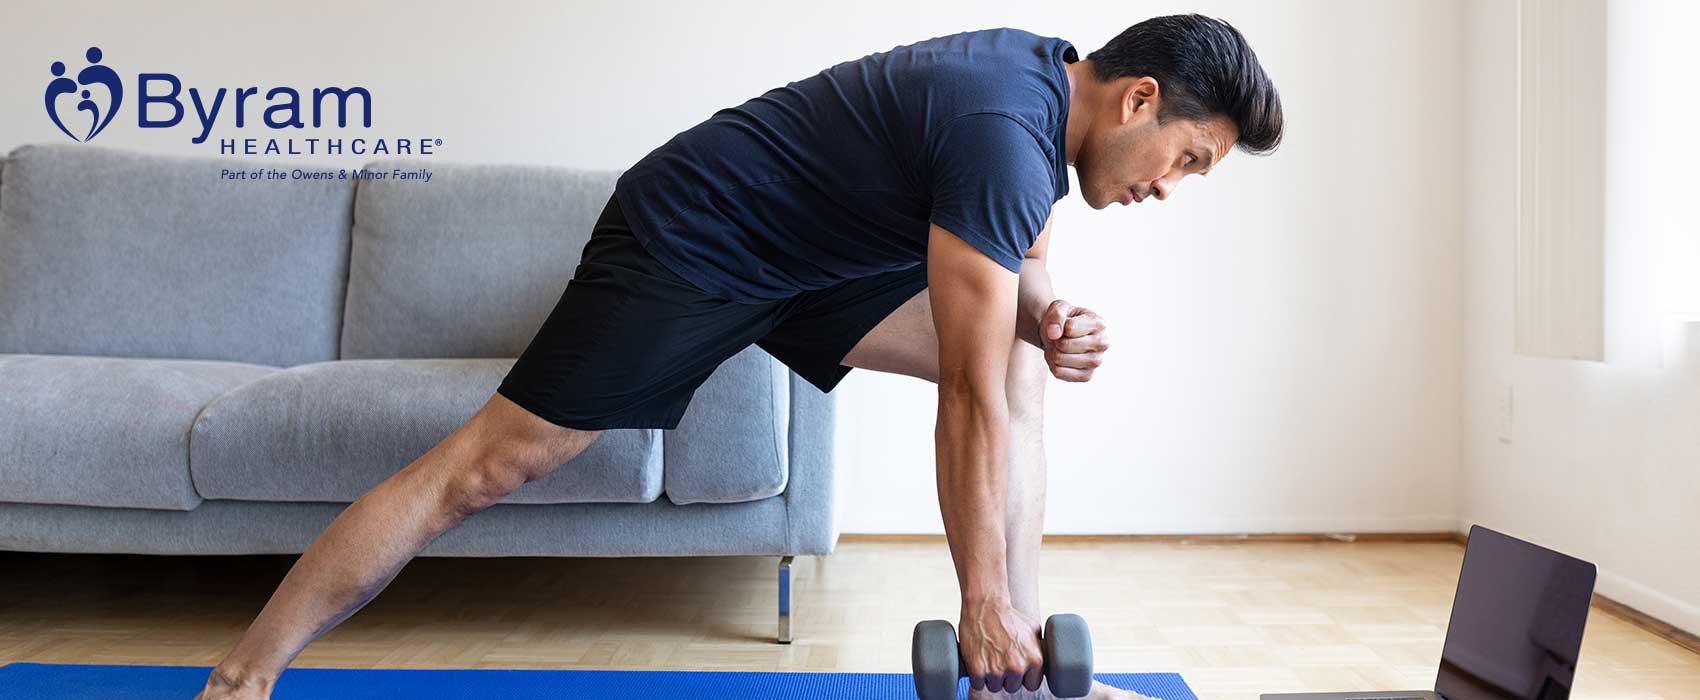 Man using dumbbell to exercise.